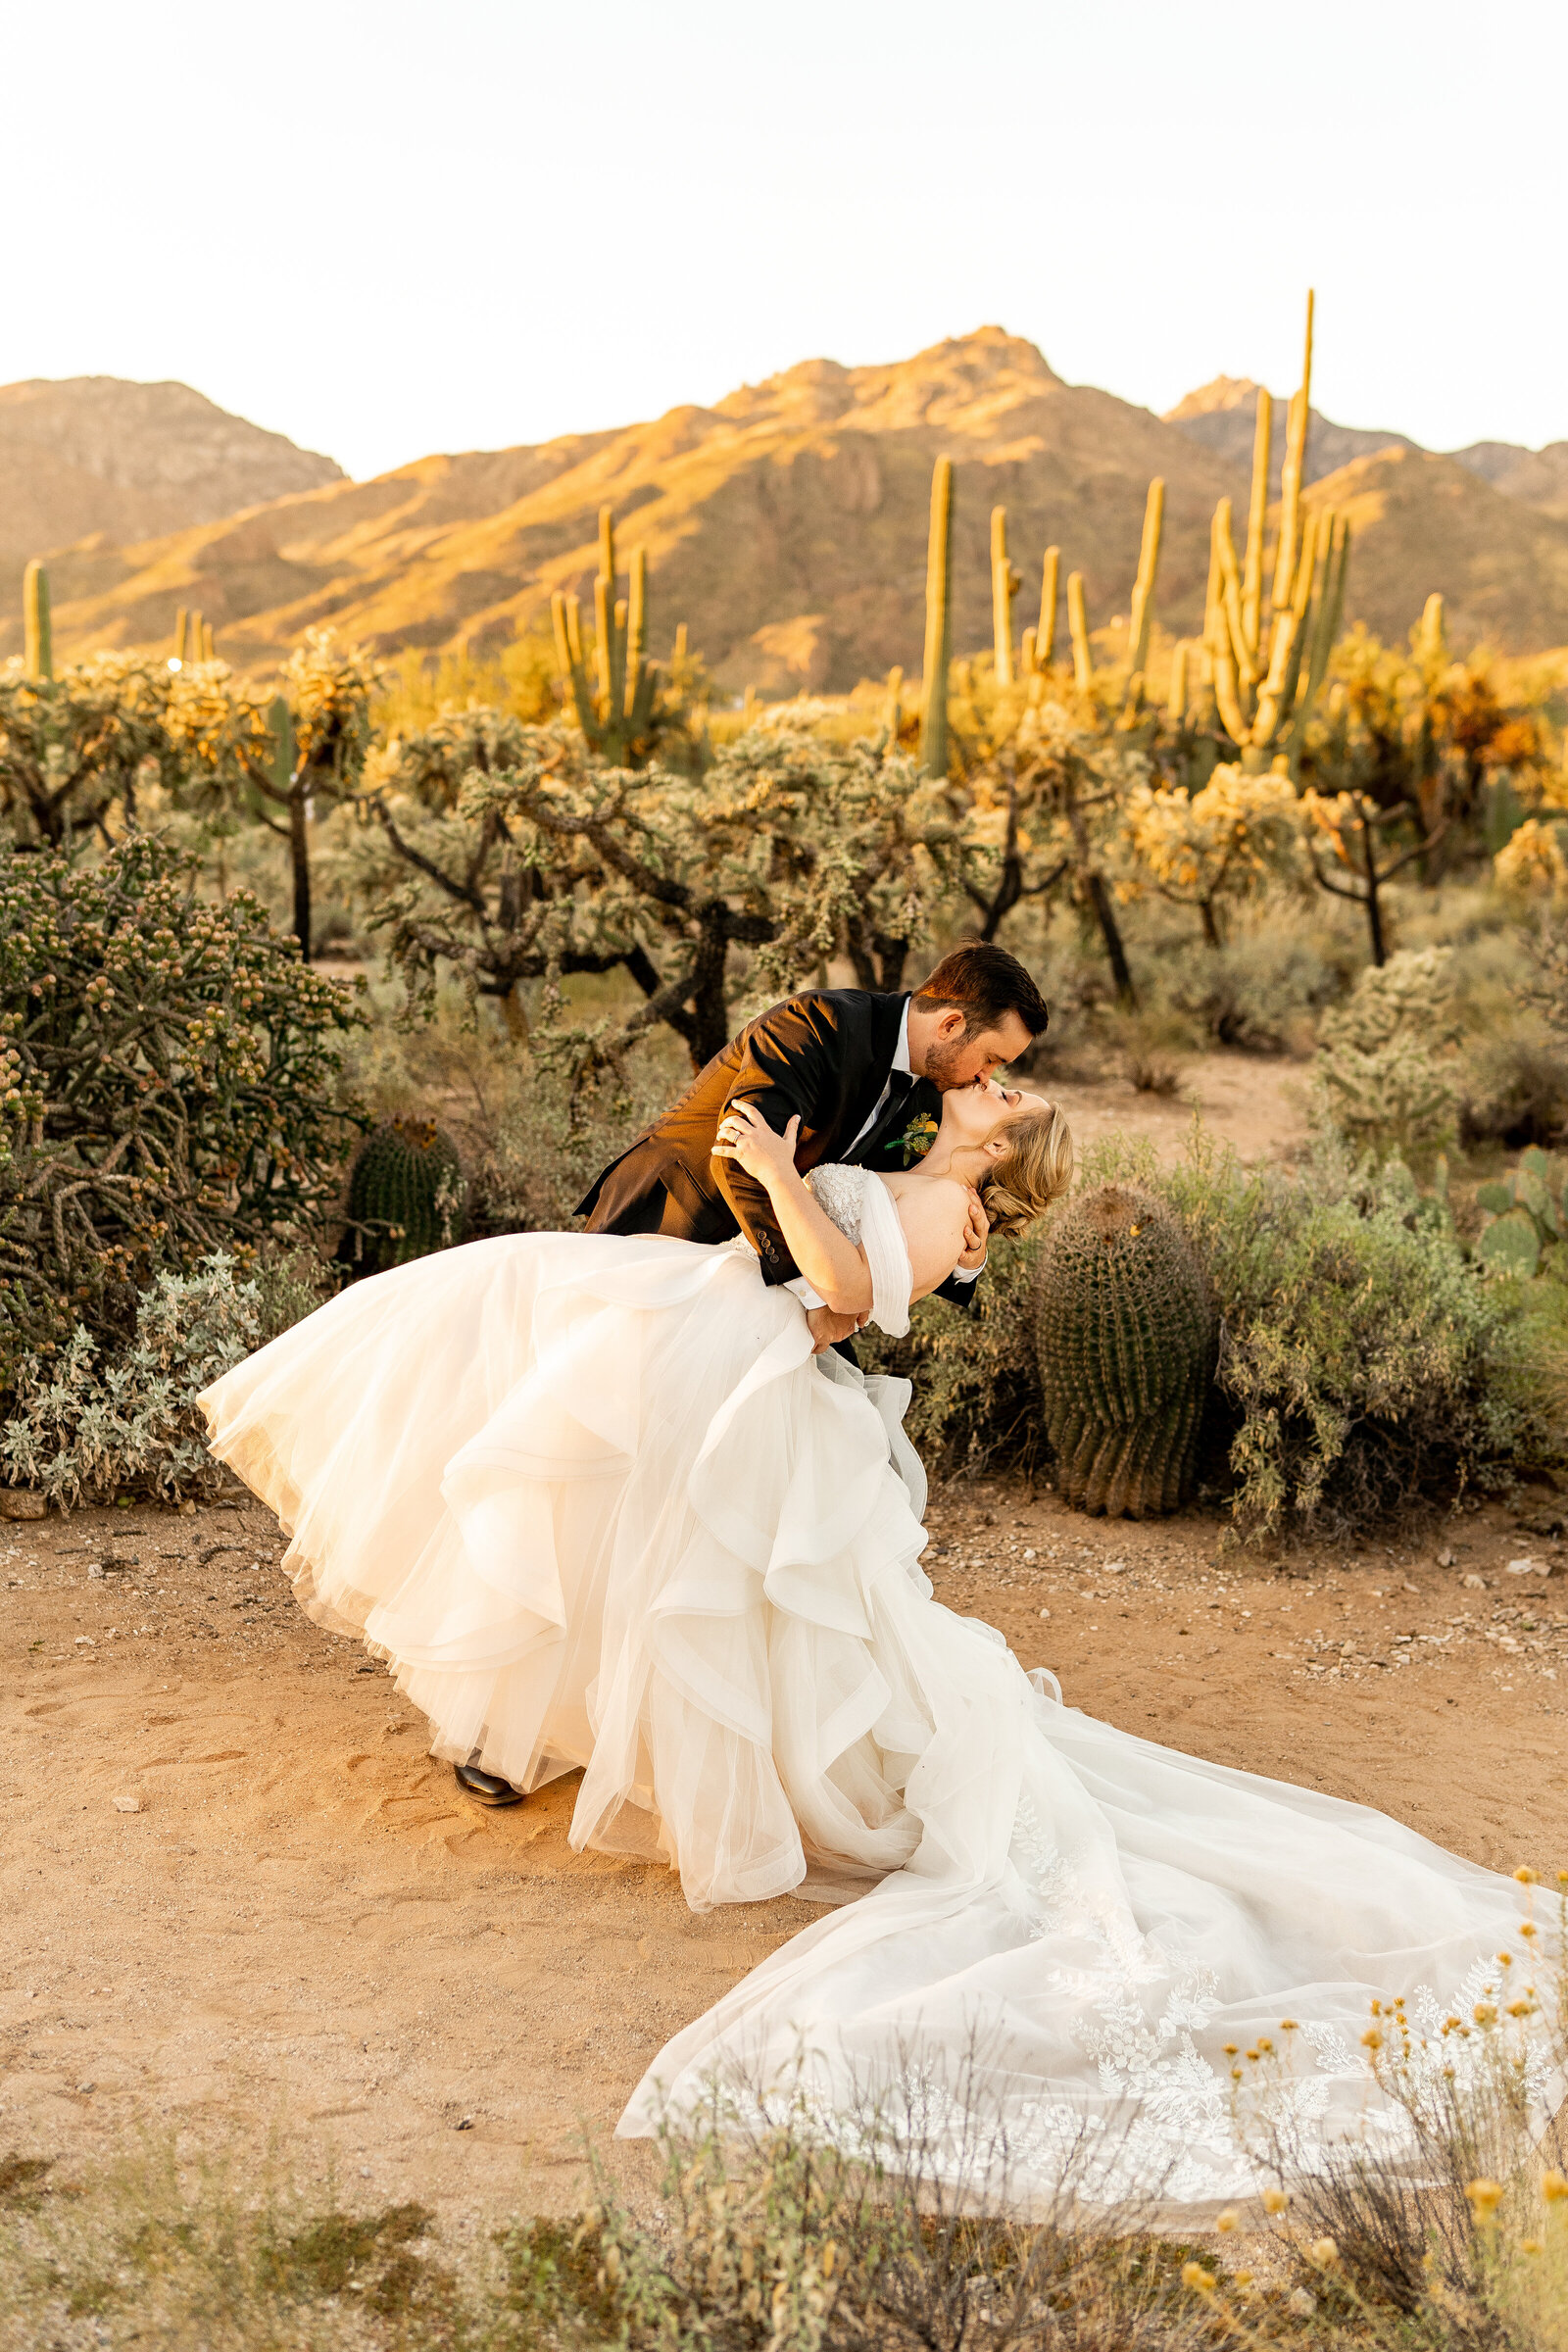 Sabino Canyon Elopement photos couple kissing in desert in front of Mount Lemmon